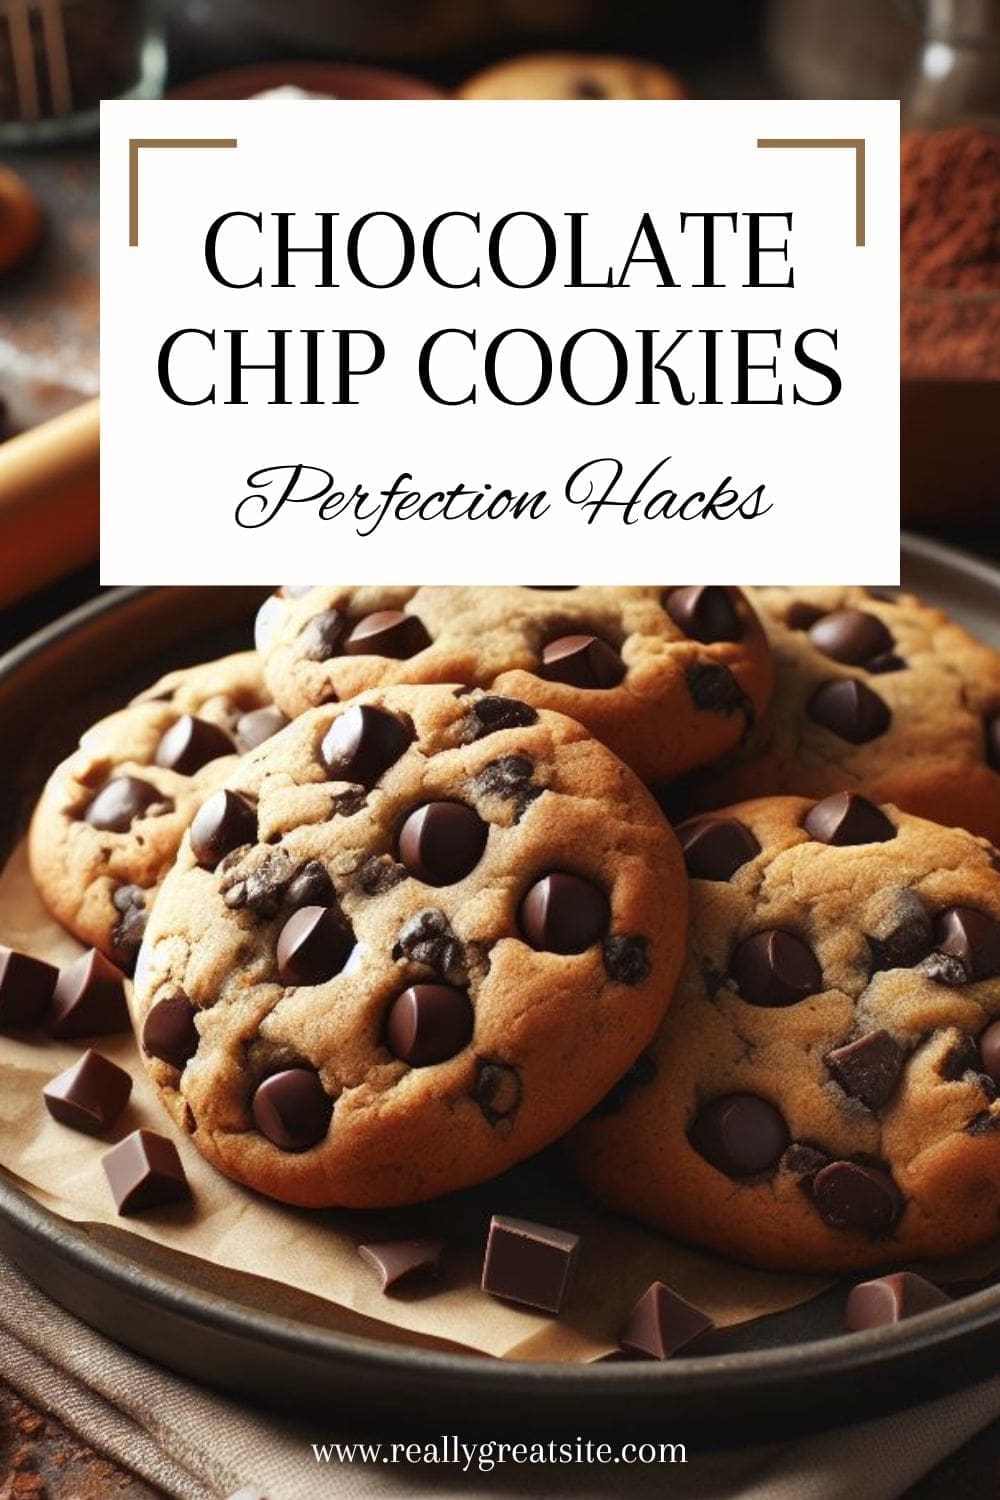 A plate of chocolate chip cookies on a wooden table.